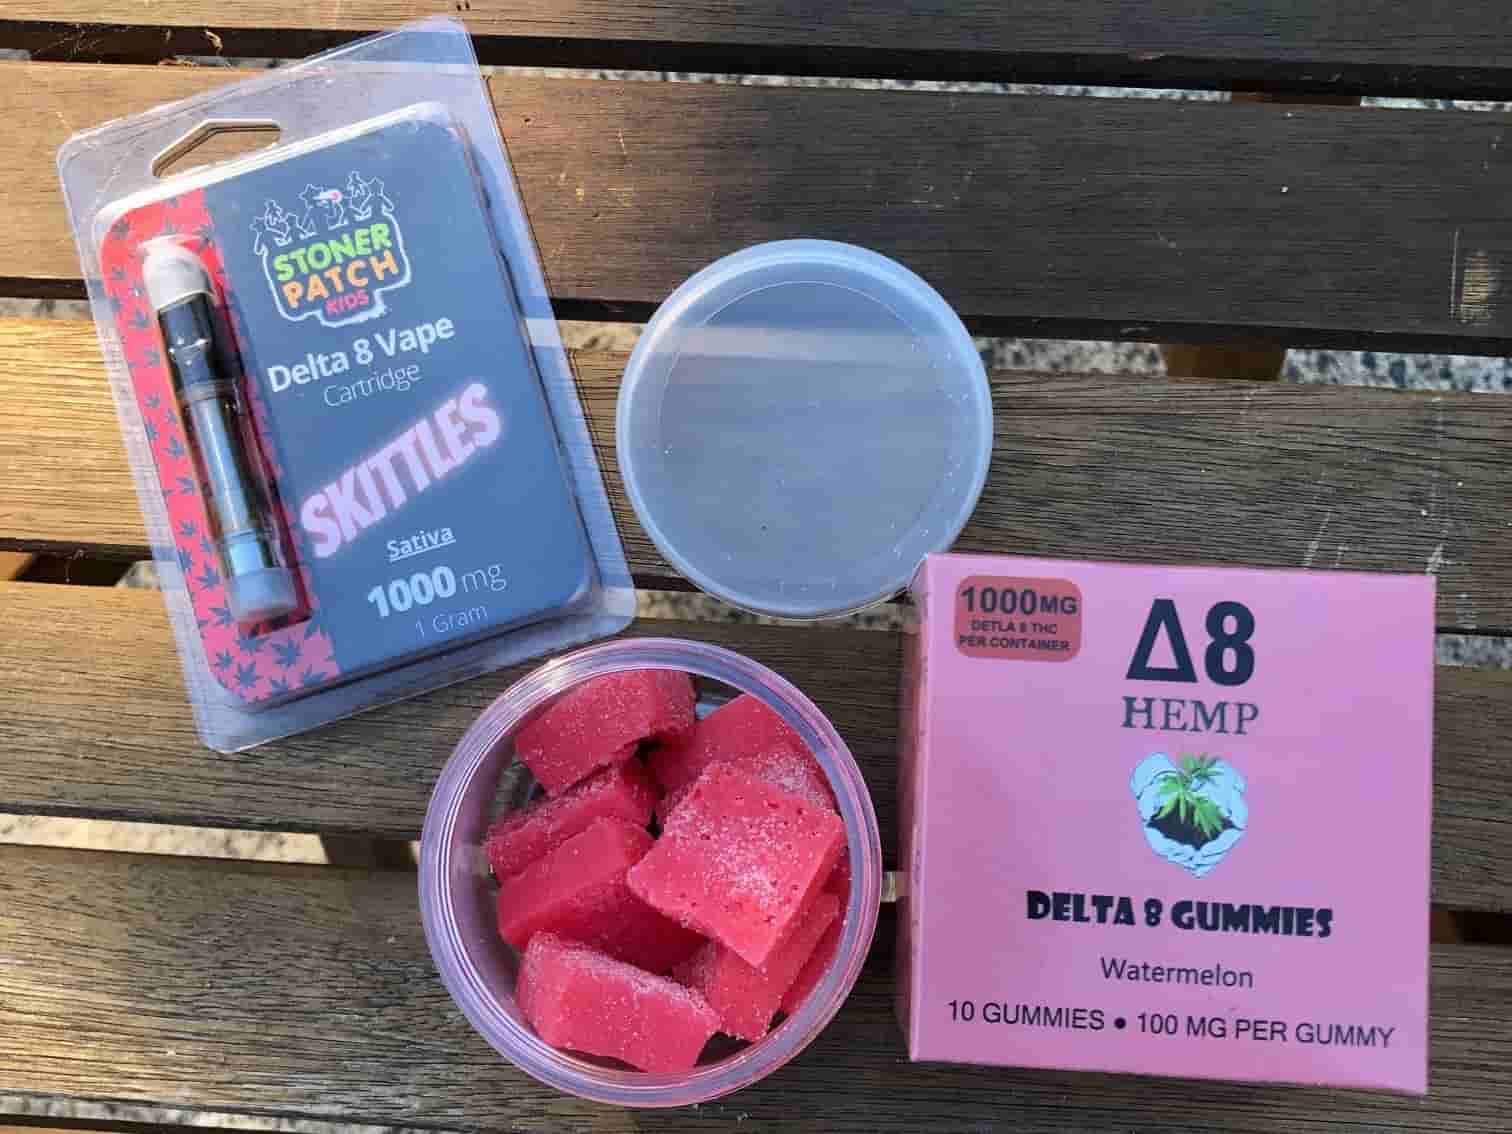 DELTA 8 THC DISPOSABLE - Gummies|Thc|Products|Hemp|Product|Brand|Effects|Delta|Gummy|Cbd|Origin|Quality|Dosage|Delta-8|Dose|Usasource|Flavors|Brands|Ingredients|Range|Customers|Edibles|Cartridges|Reviews|Side|List|Health|Cannabis|Lab|Customer|Options|Benefits|Overviewproducts|Research|Time|Market|Drug|Farms|Party|People|Delta-8 Thc|Delta-8 Products|Delta-9 Thc|Delta-8 Gummies|Delta-8 Thc Products|Delta-8 Brands|Customer Reviews|Brand Overviewproducts|Drug Tests|Free Shipping|Similar Benefits|Vape Cartridges|Hemp Doctor|United States|Third Party Lab|Drug Test|Thc Edibles|Health Canada|Cannabis Plant|Side Effects|Organic Hemp|Diamond Cbd|Reaction Time|Legal Hemp|Psychoactive Effects|Psychoactive Properties|Third Party|Dry Eyes|Delta-8 Market|Tolerance Level